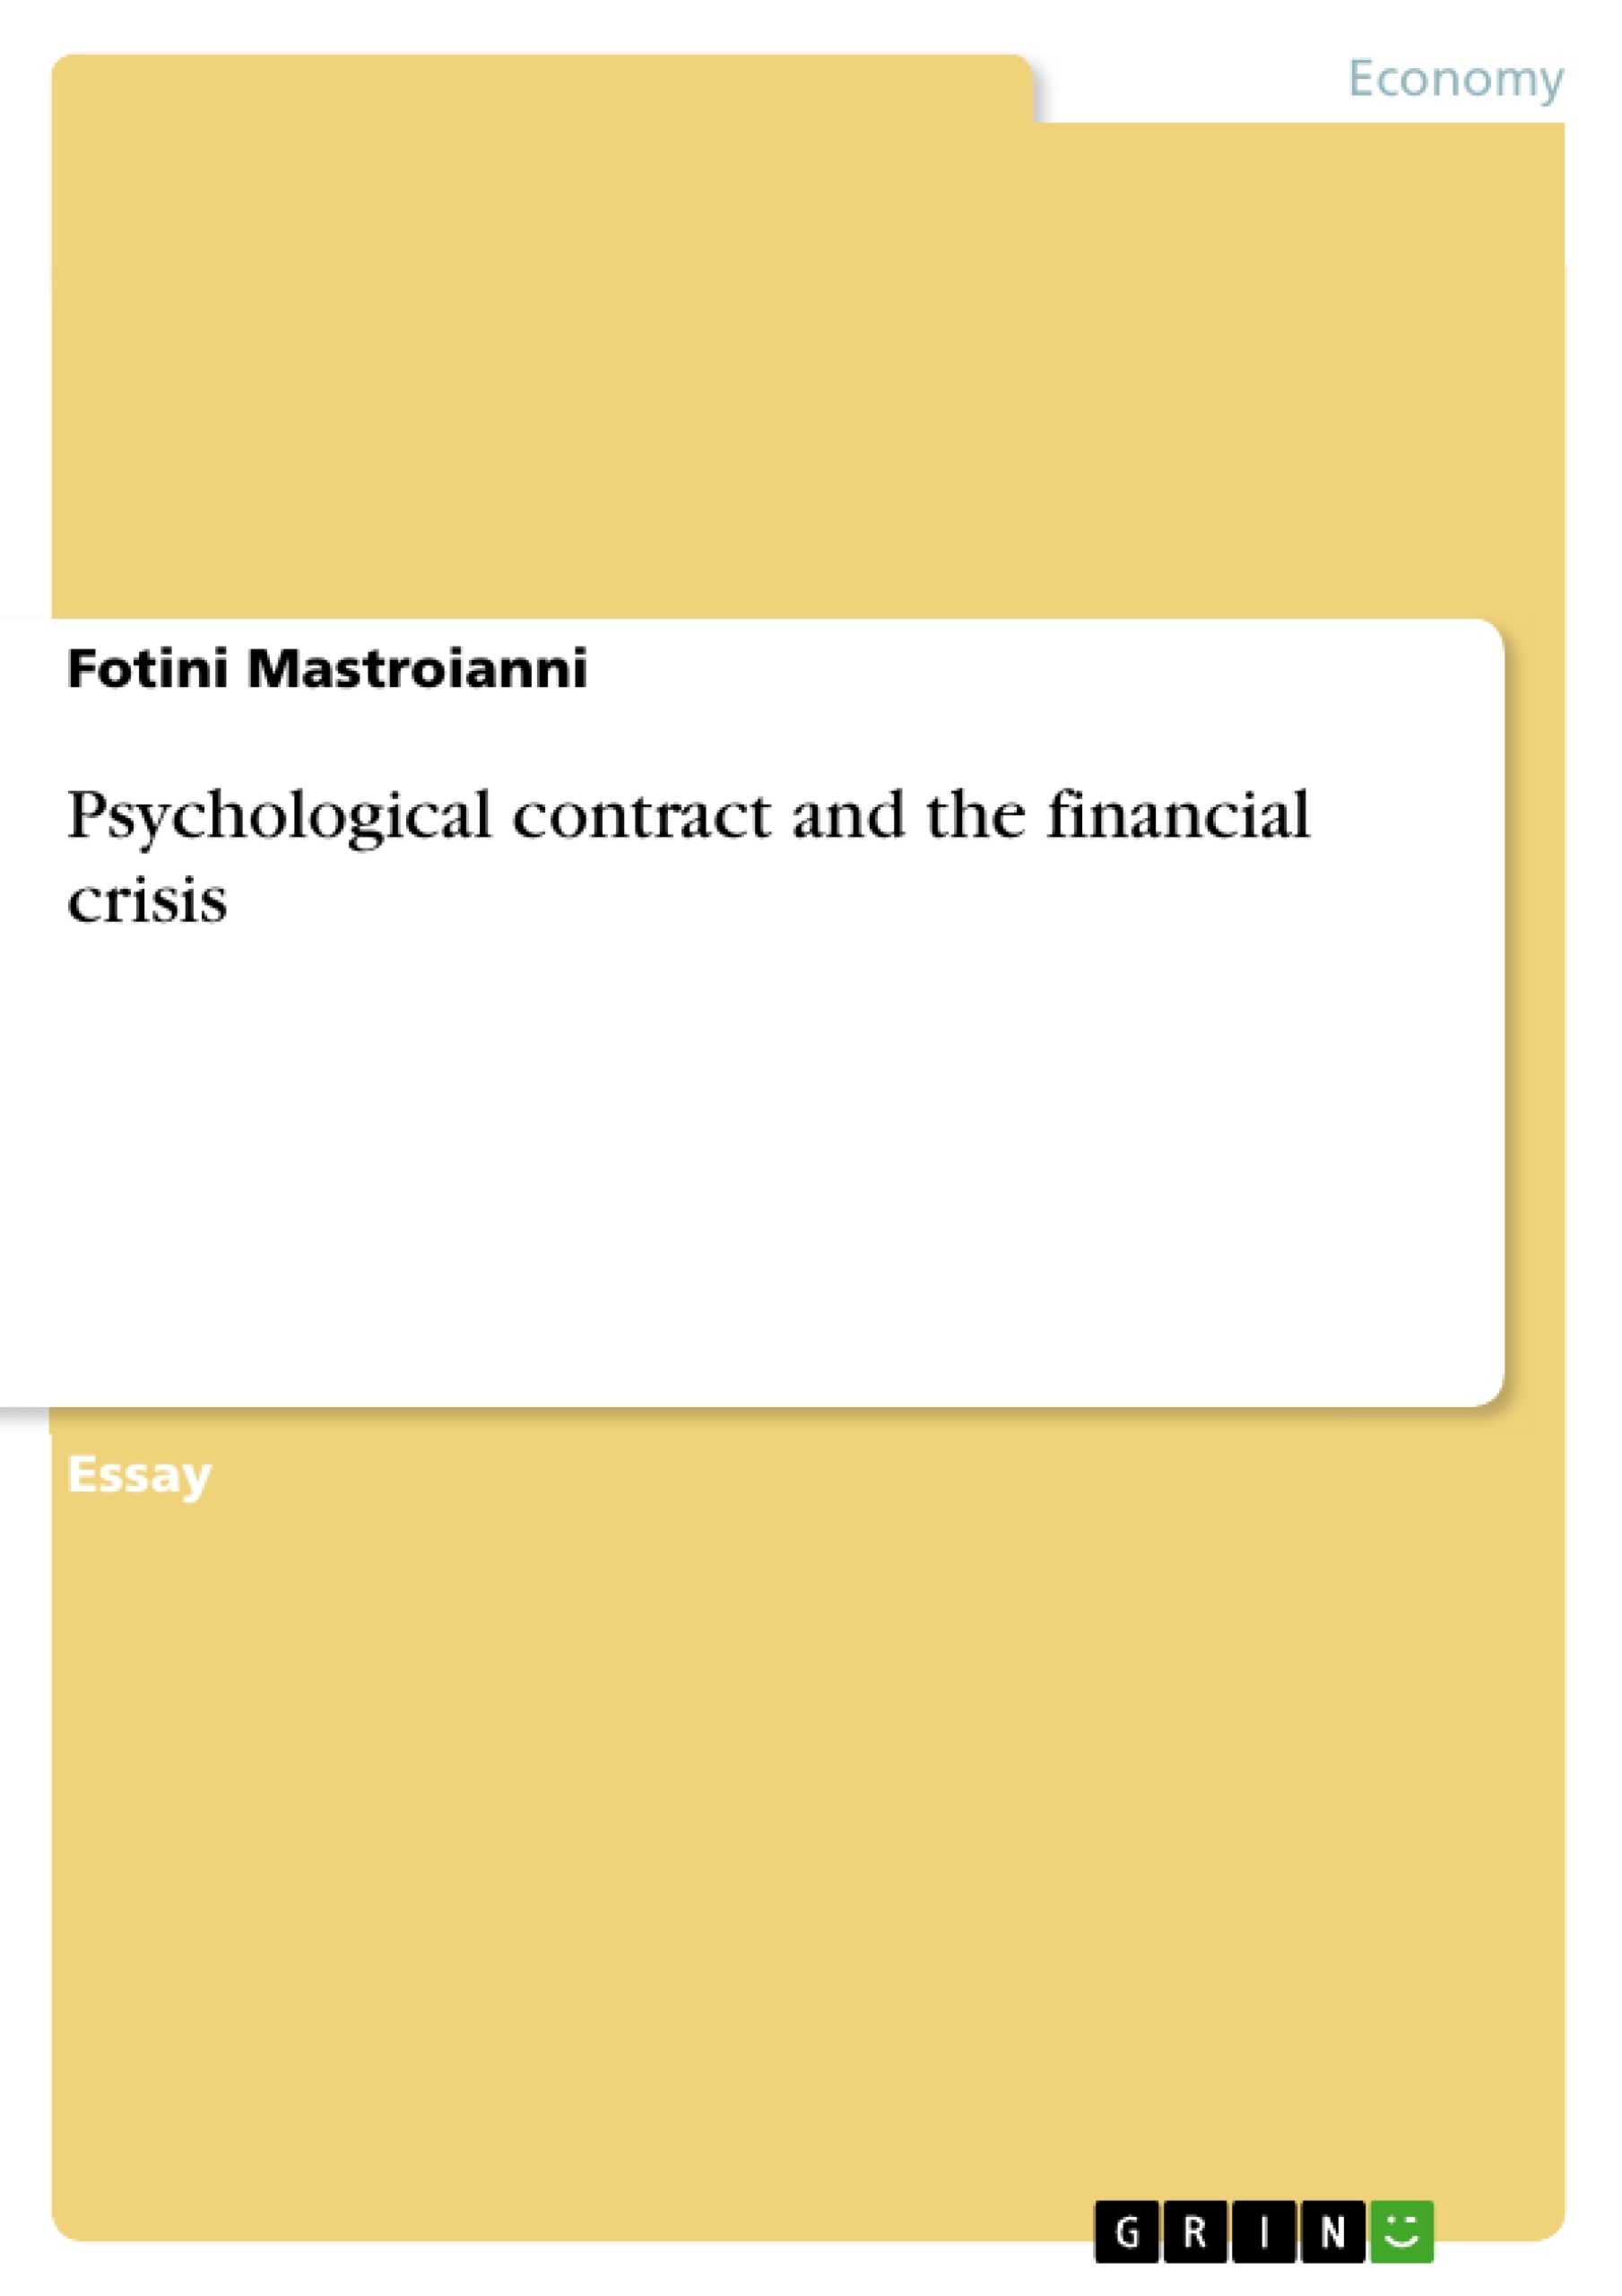 Title: Psychological contract and the financial crisis